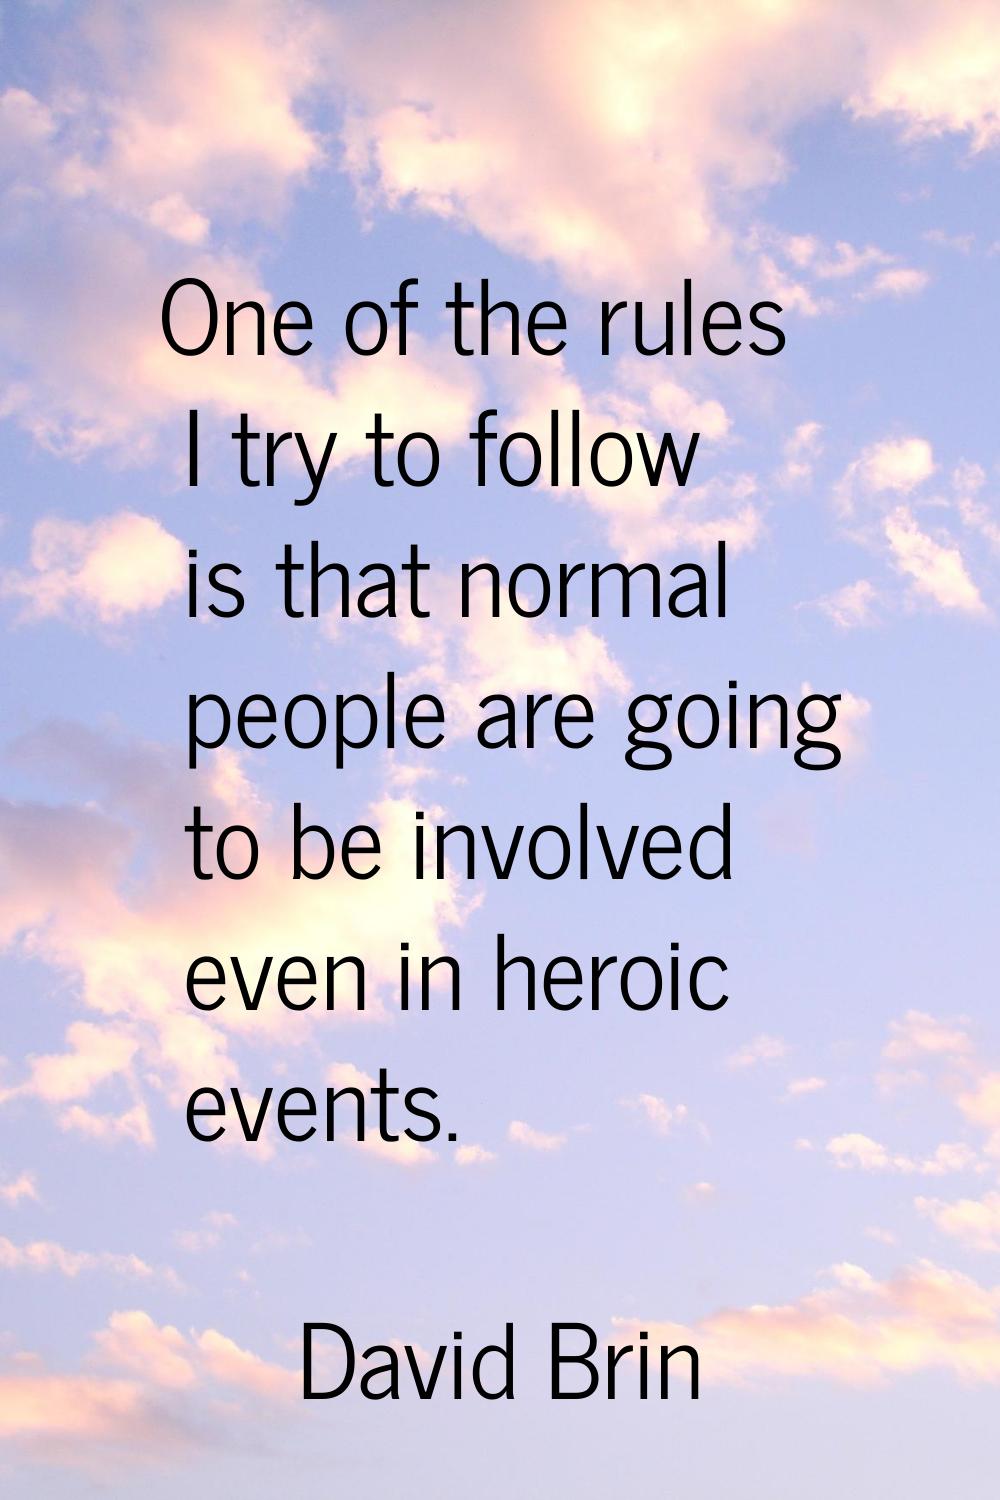 One of the rules I try to follow is that normal people are going to be involved even in heroic even